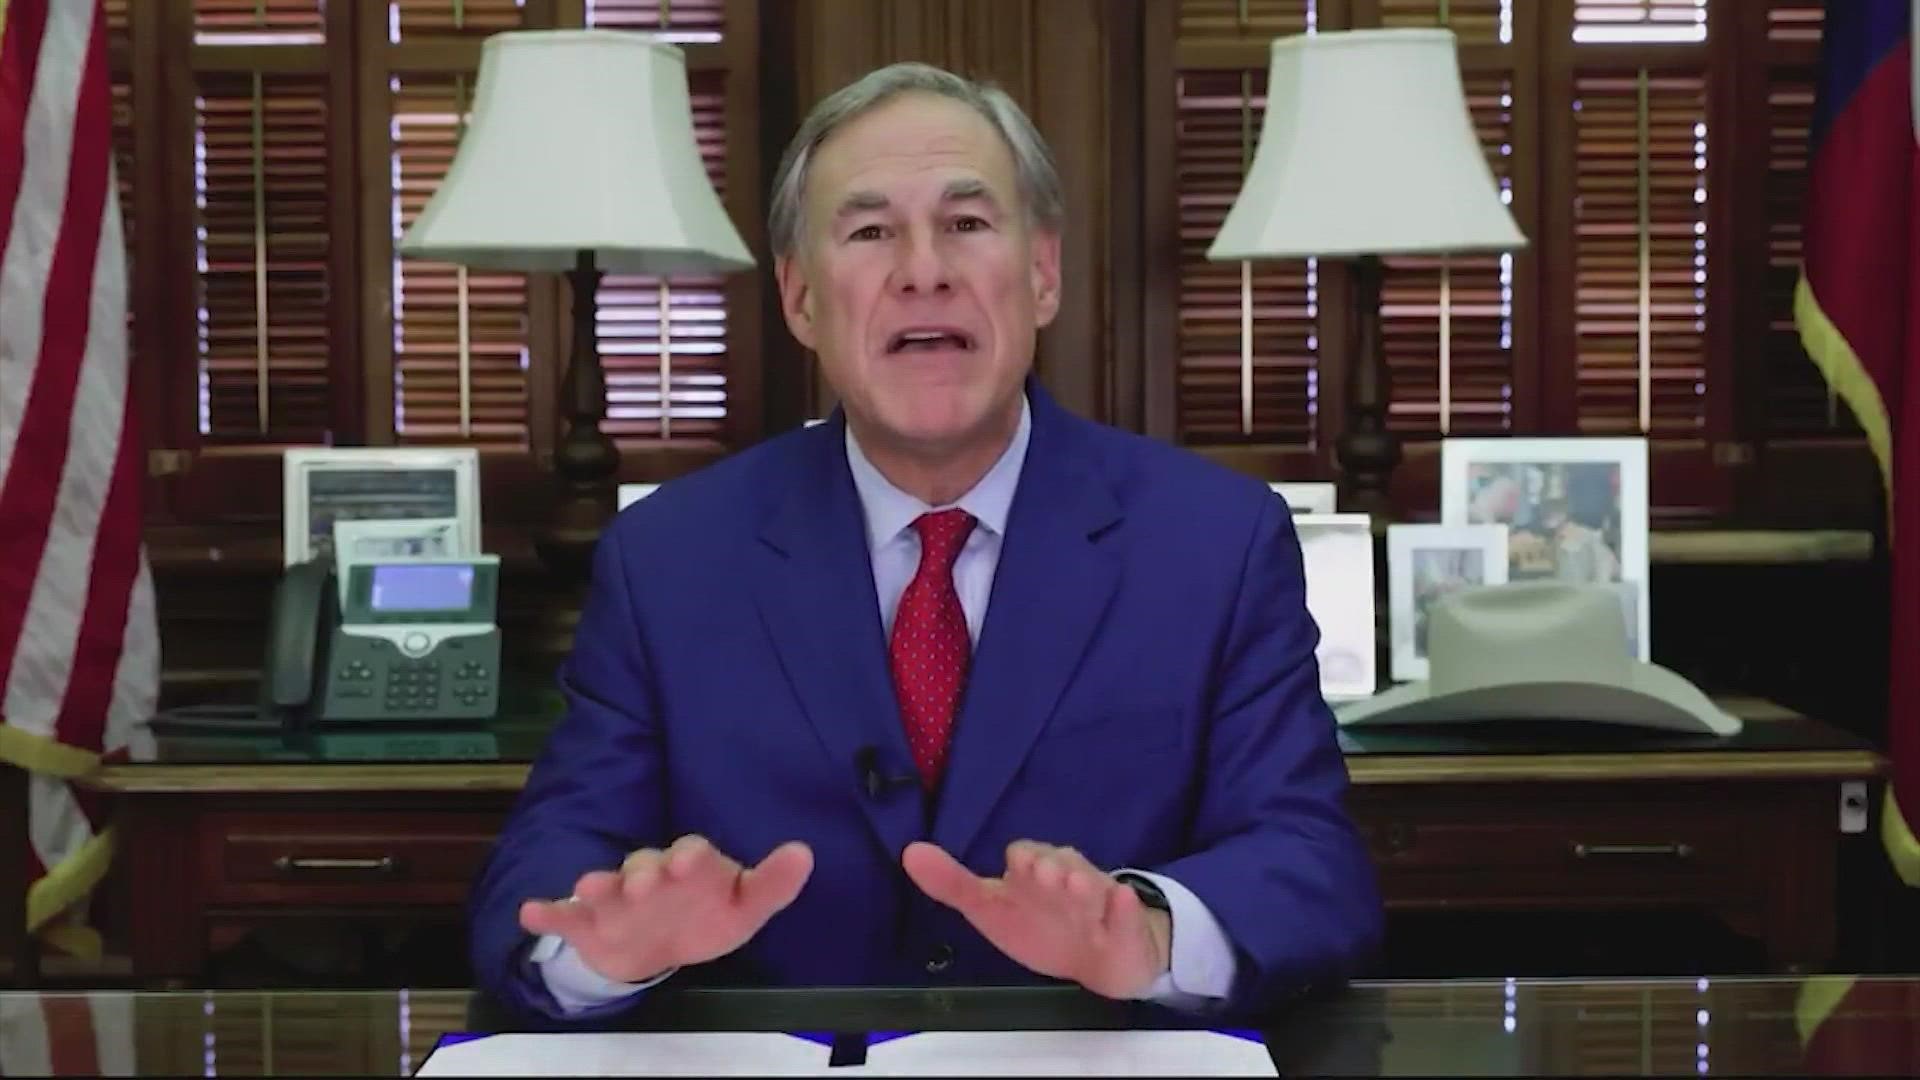 Gov. Greg Abbott on Wednesday announced an executive order banning COVID-19 vaccine mandates regardless of a vaccine’s approval status with the FDA.